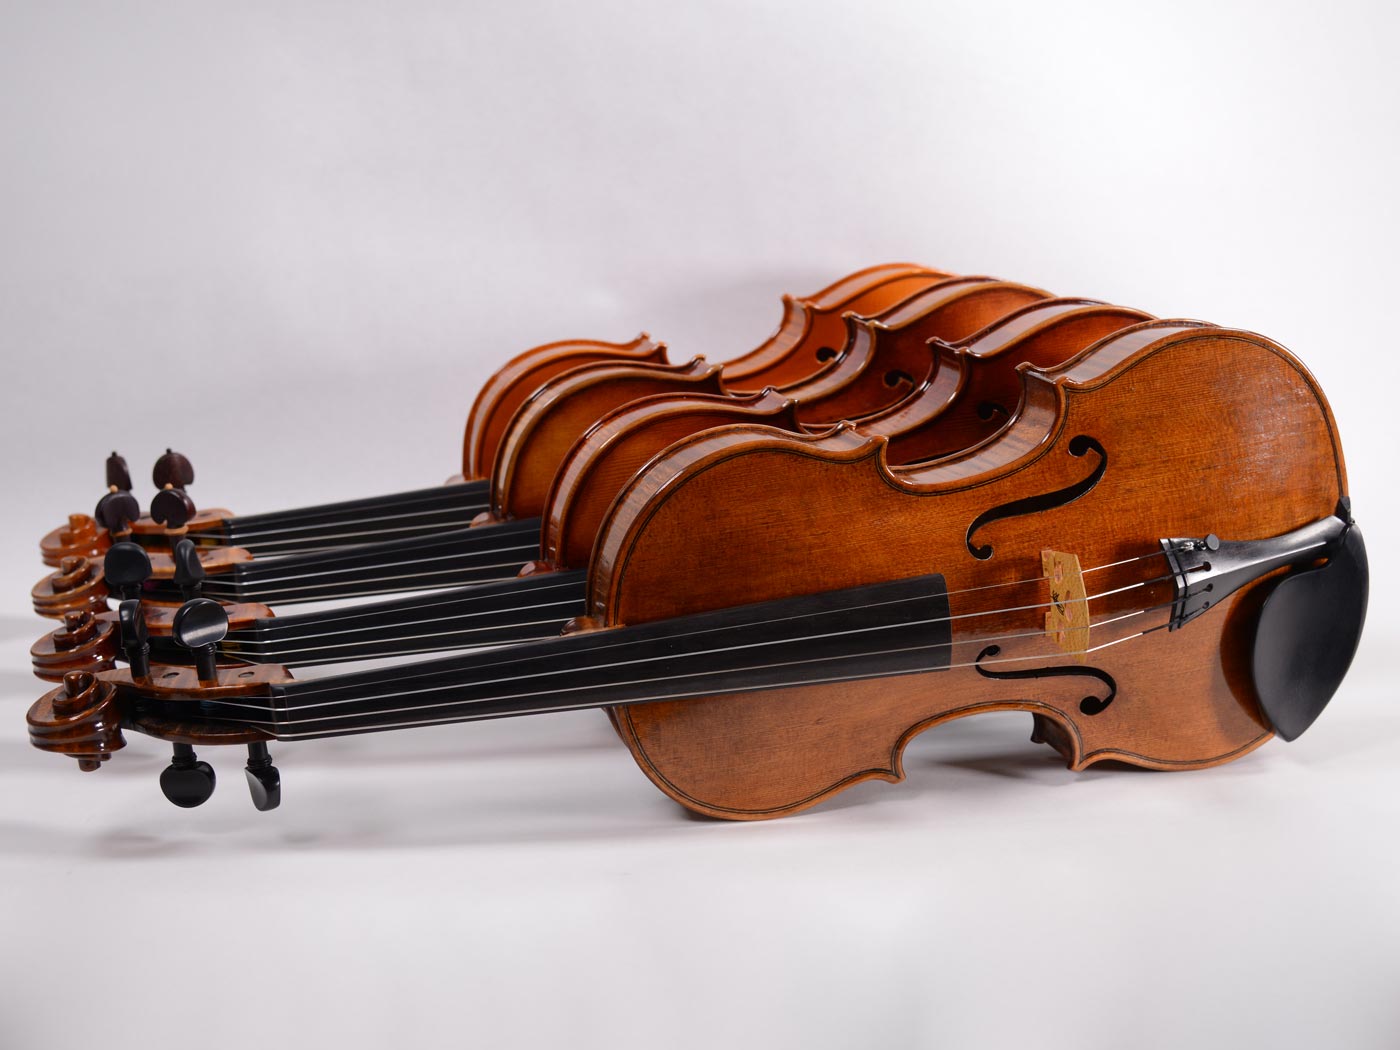 Five Reasons to Choose the More Expensive Violin